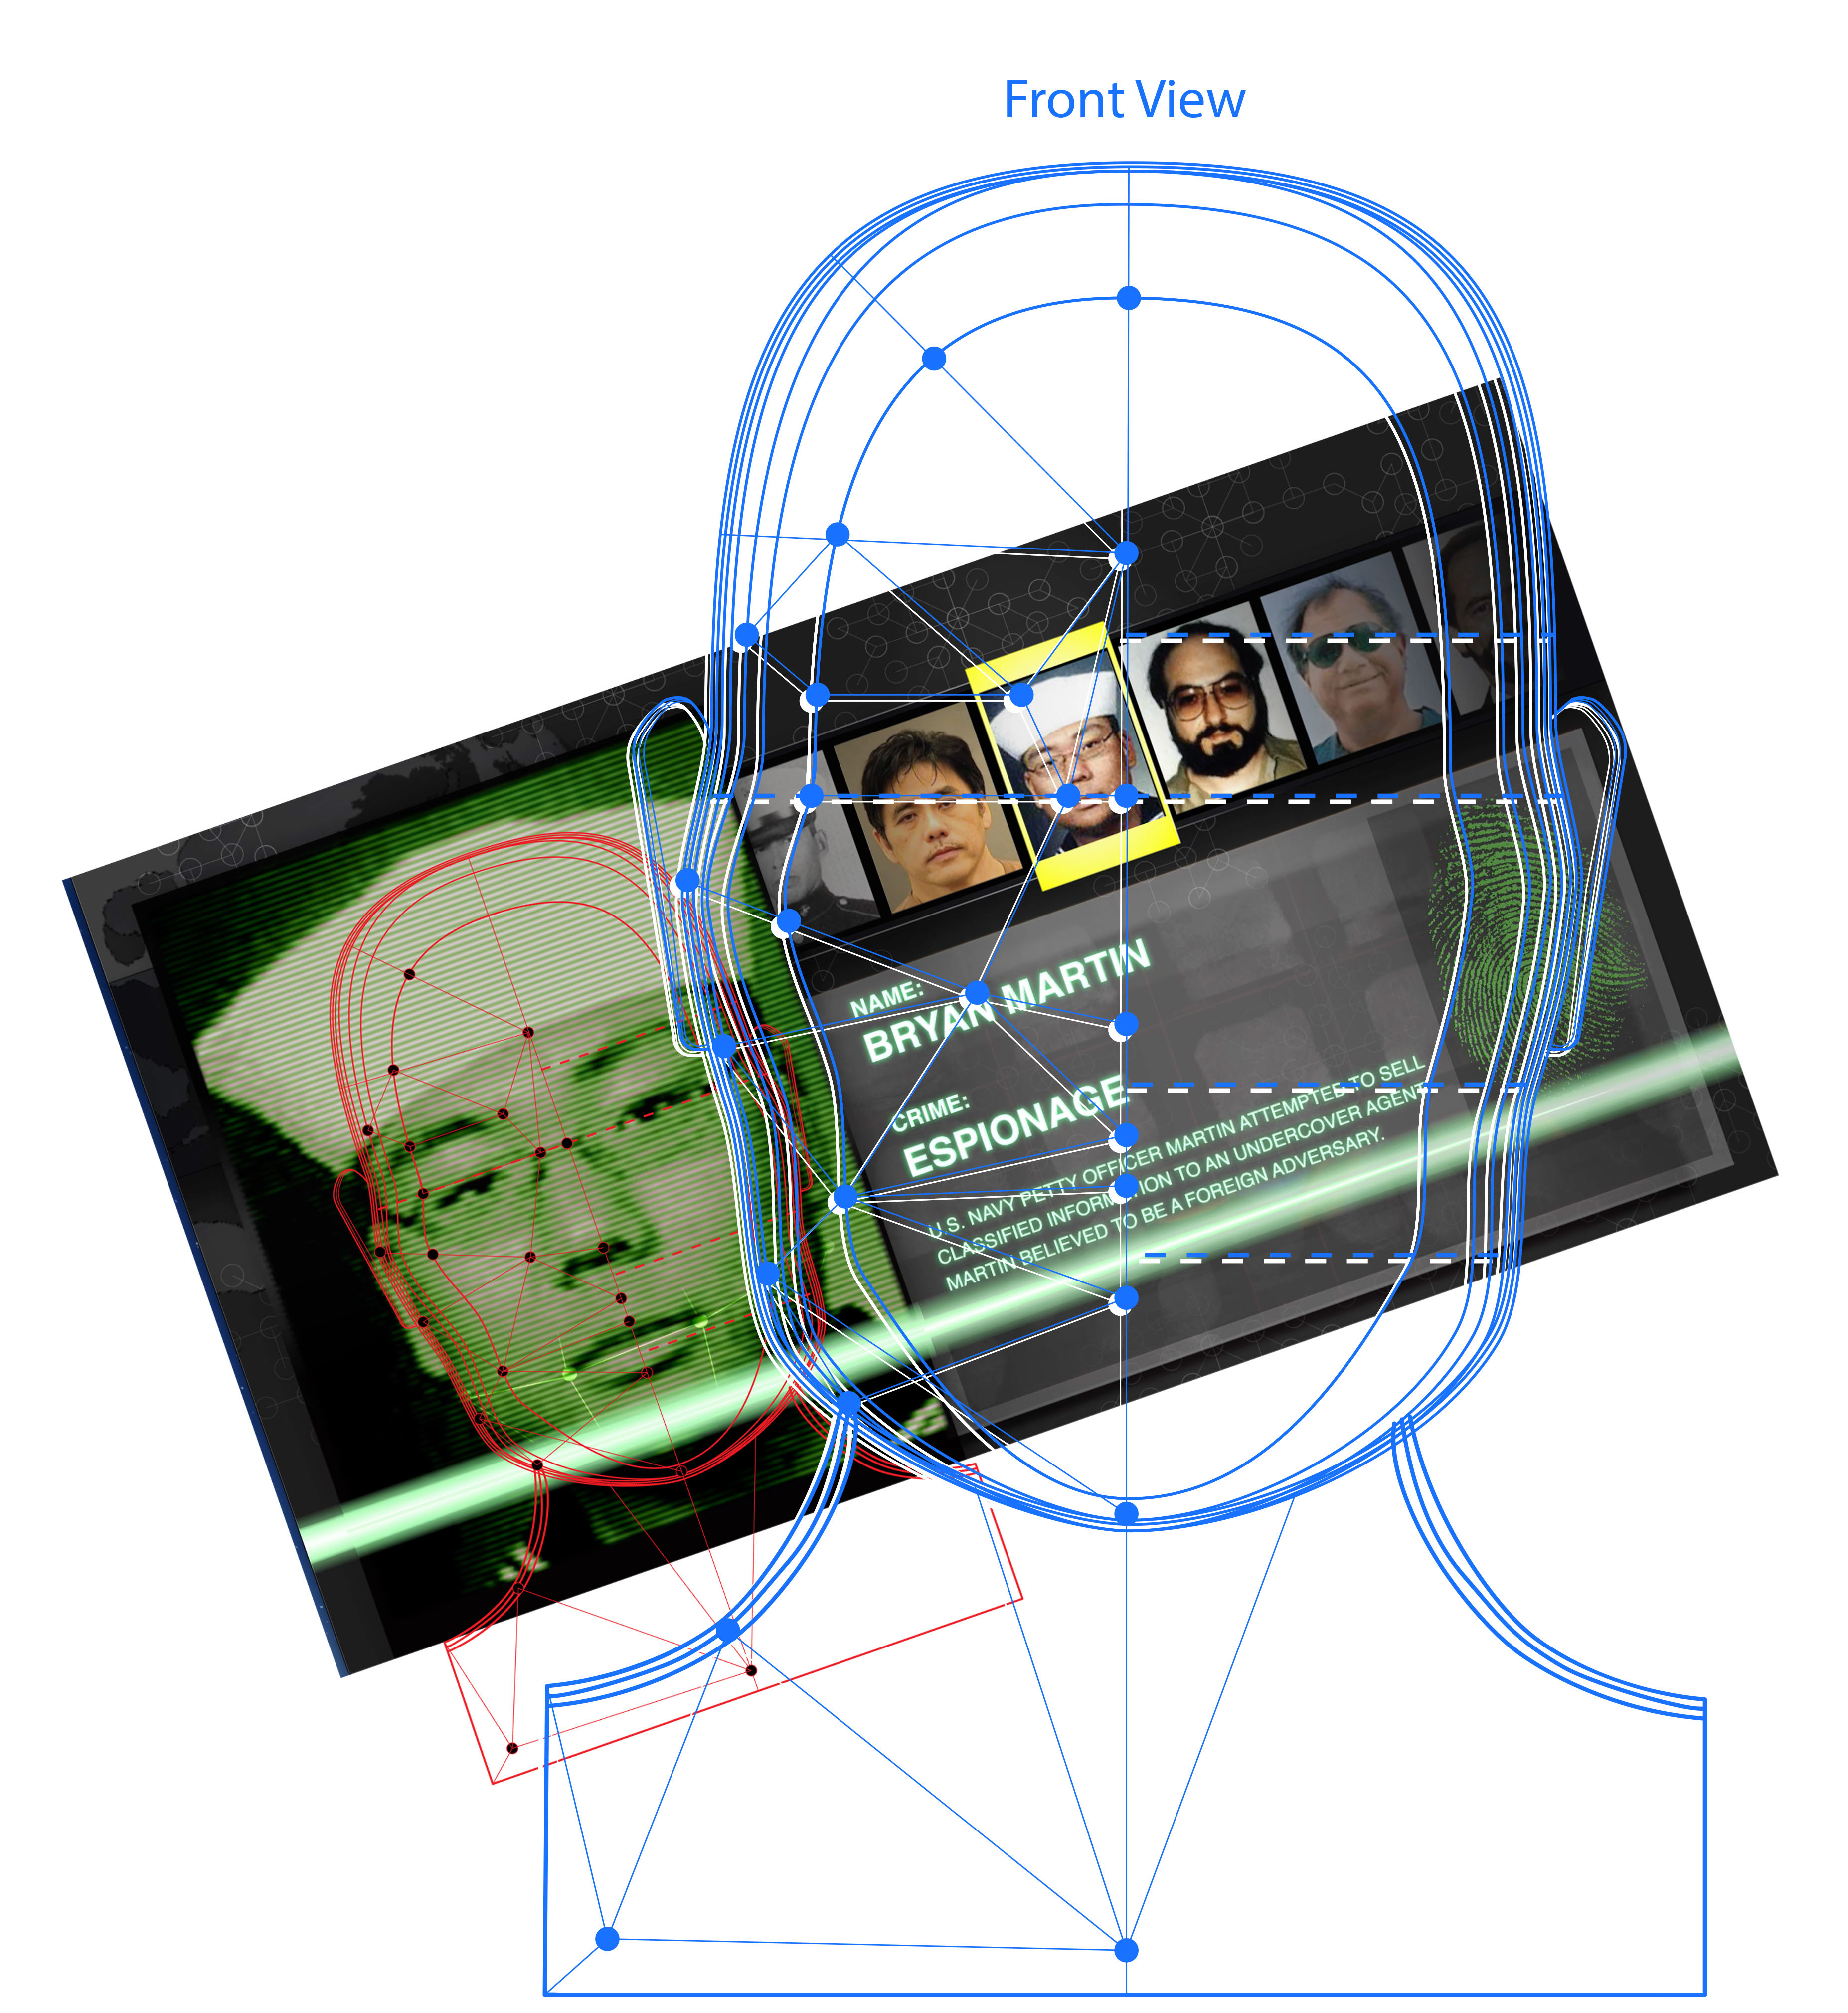 Facial recognition technology is the new rogues' gallery.